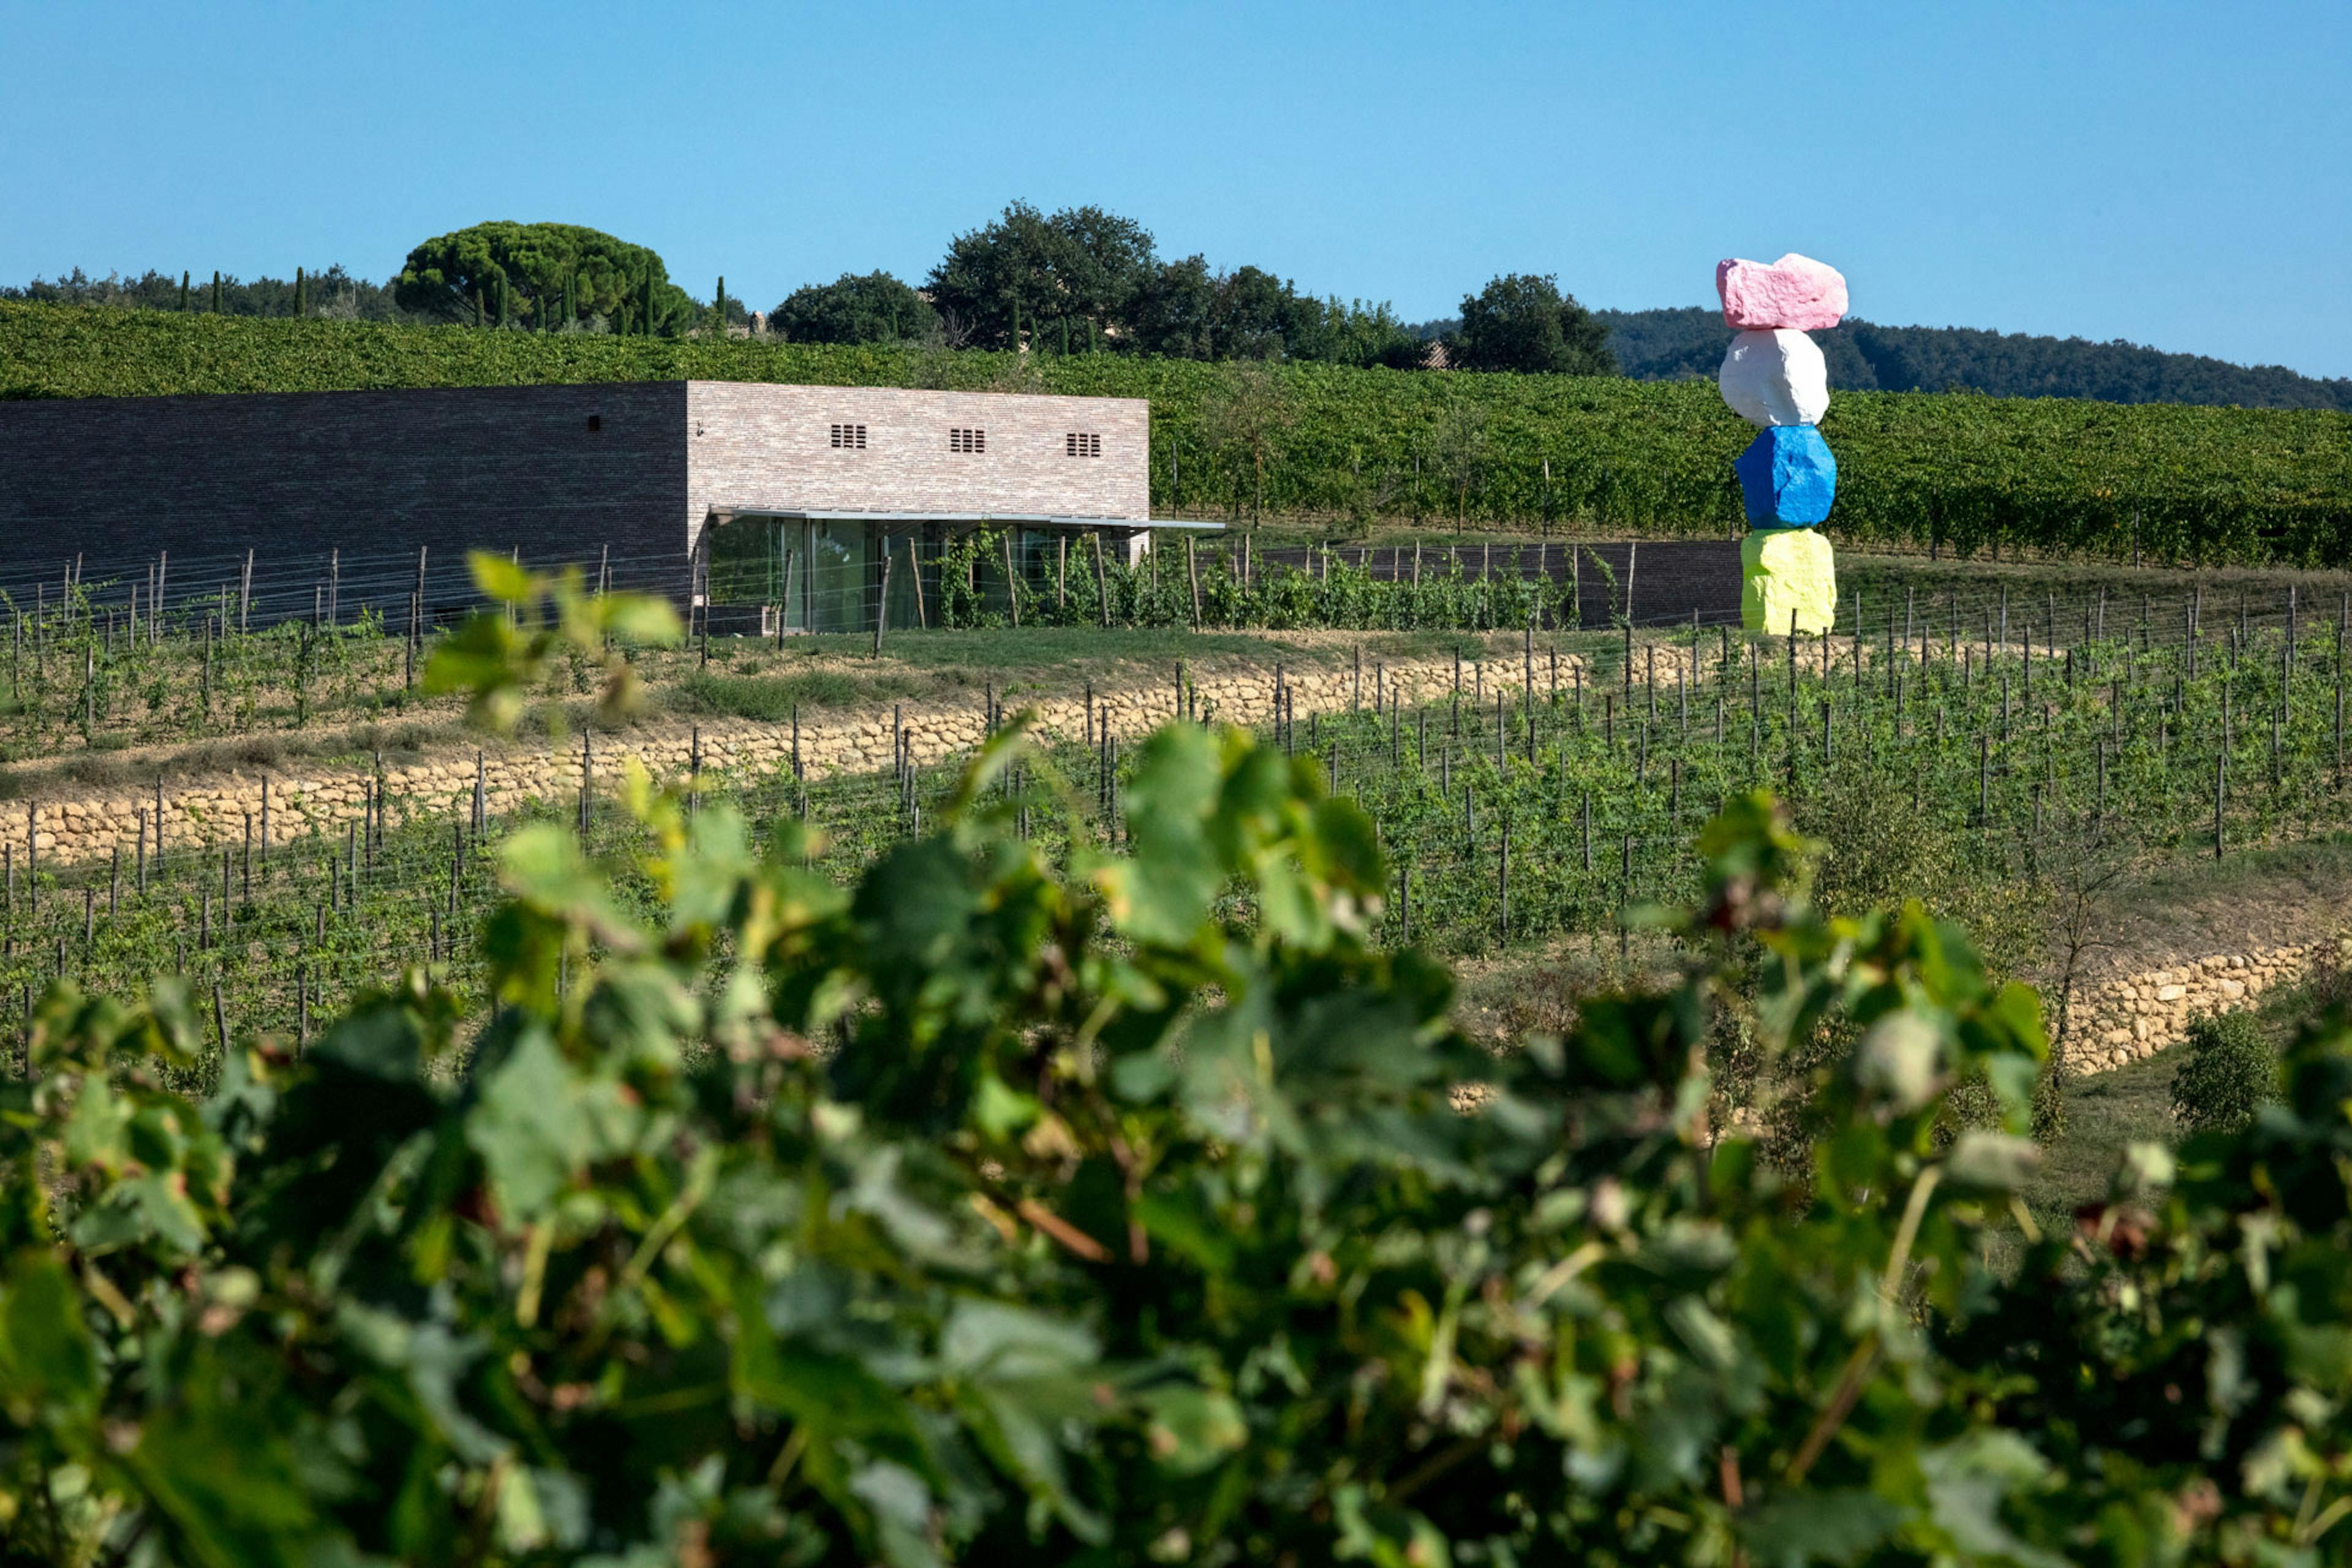 View of the winery of Fabbrica Pienza with the coloured sculpture of Ugo Rondinone and the vineyards on foreground